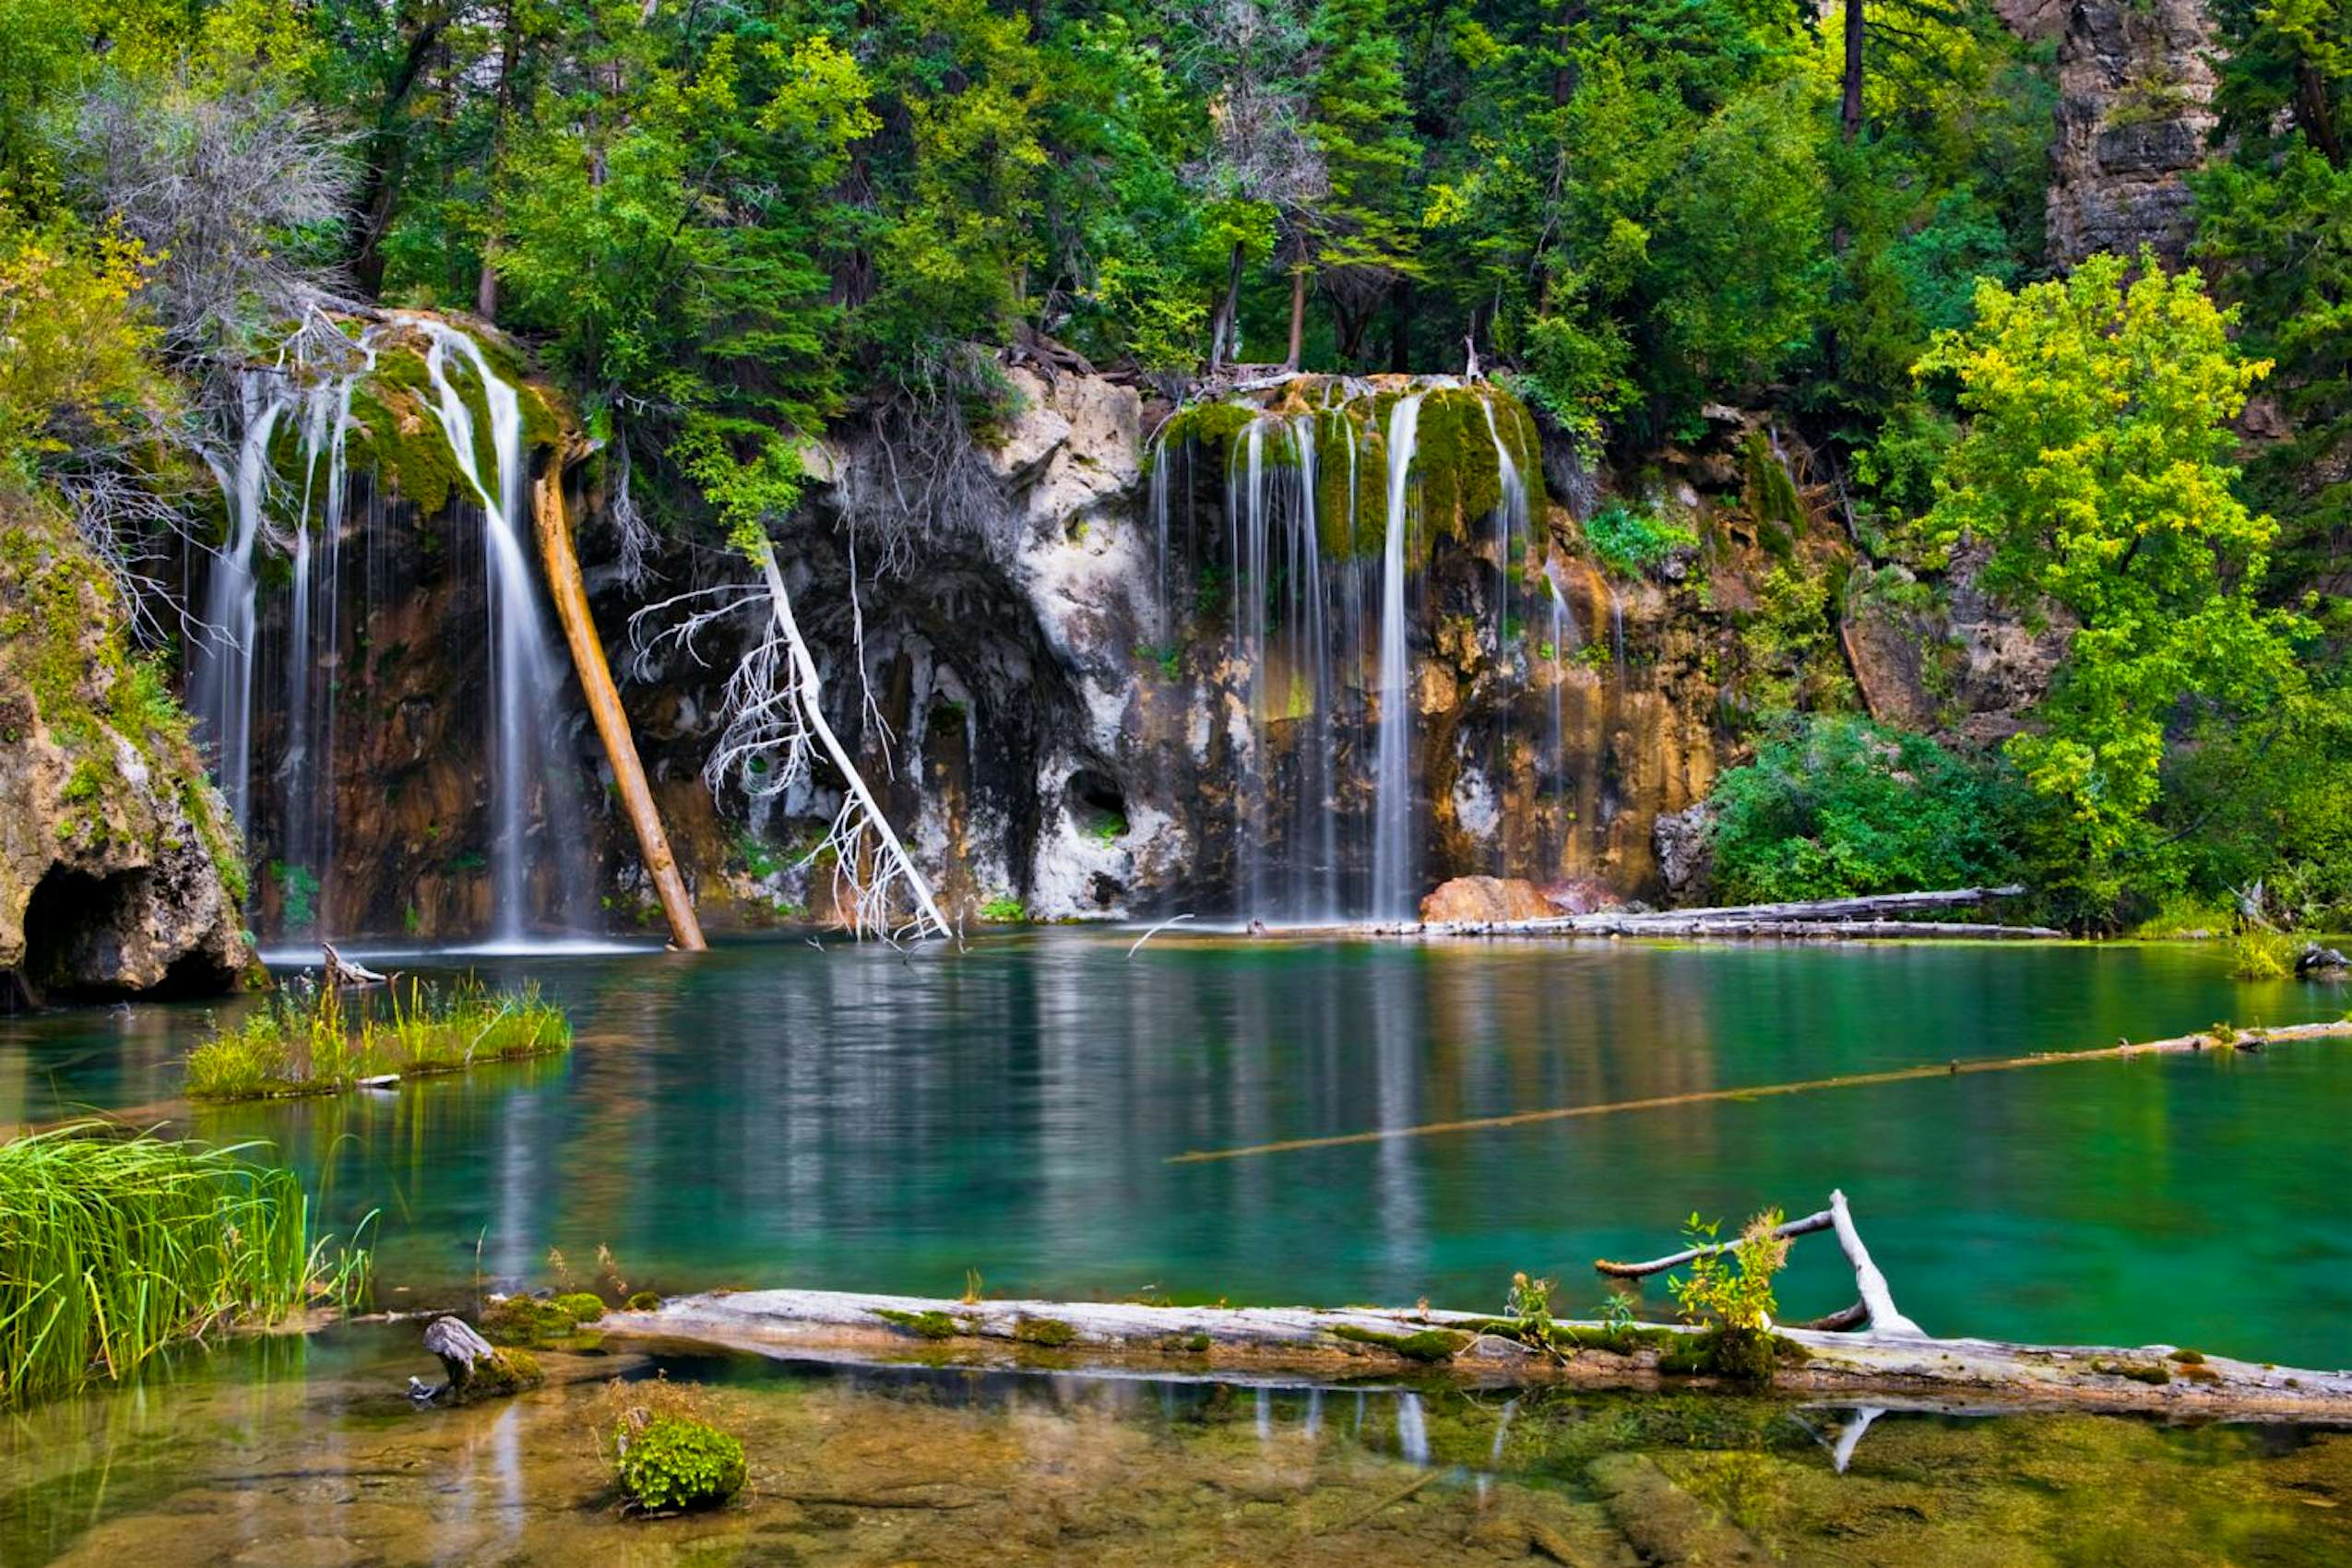 Thousands register to hike in Colorado's Hanging Lake during peak